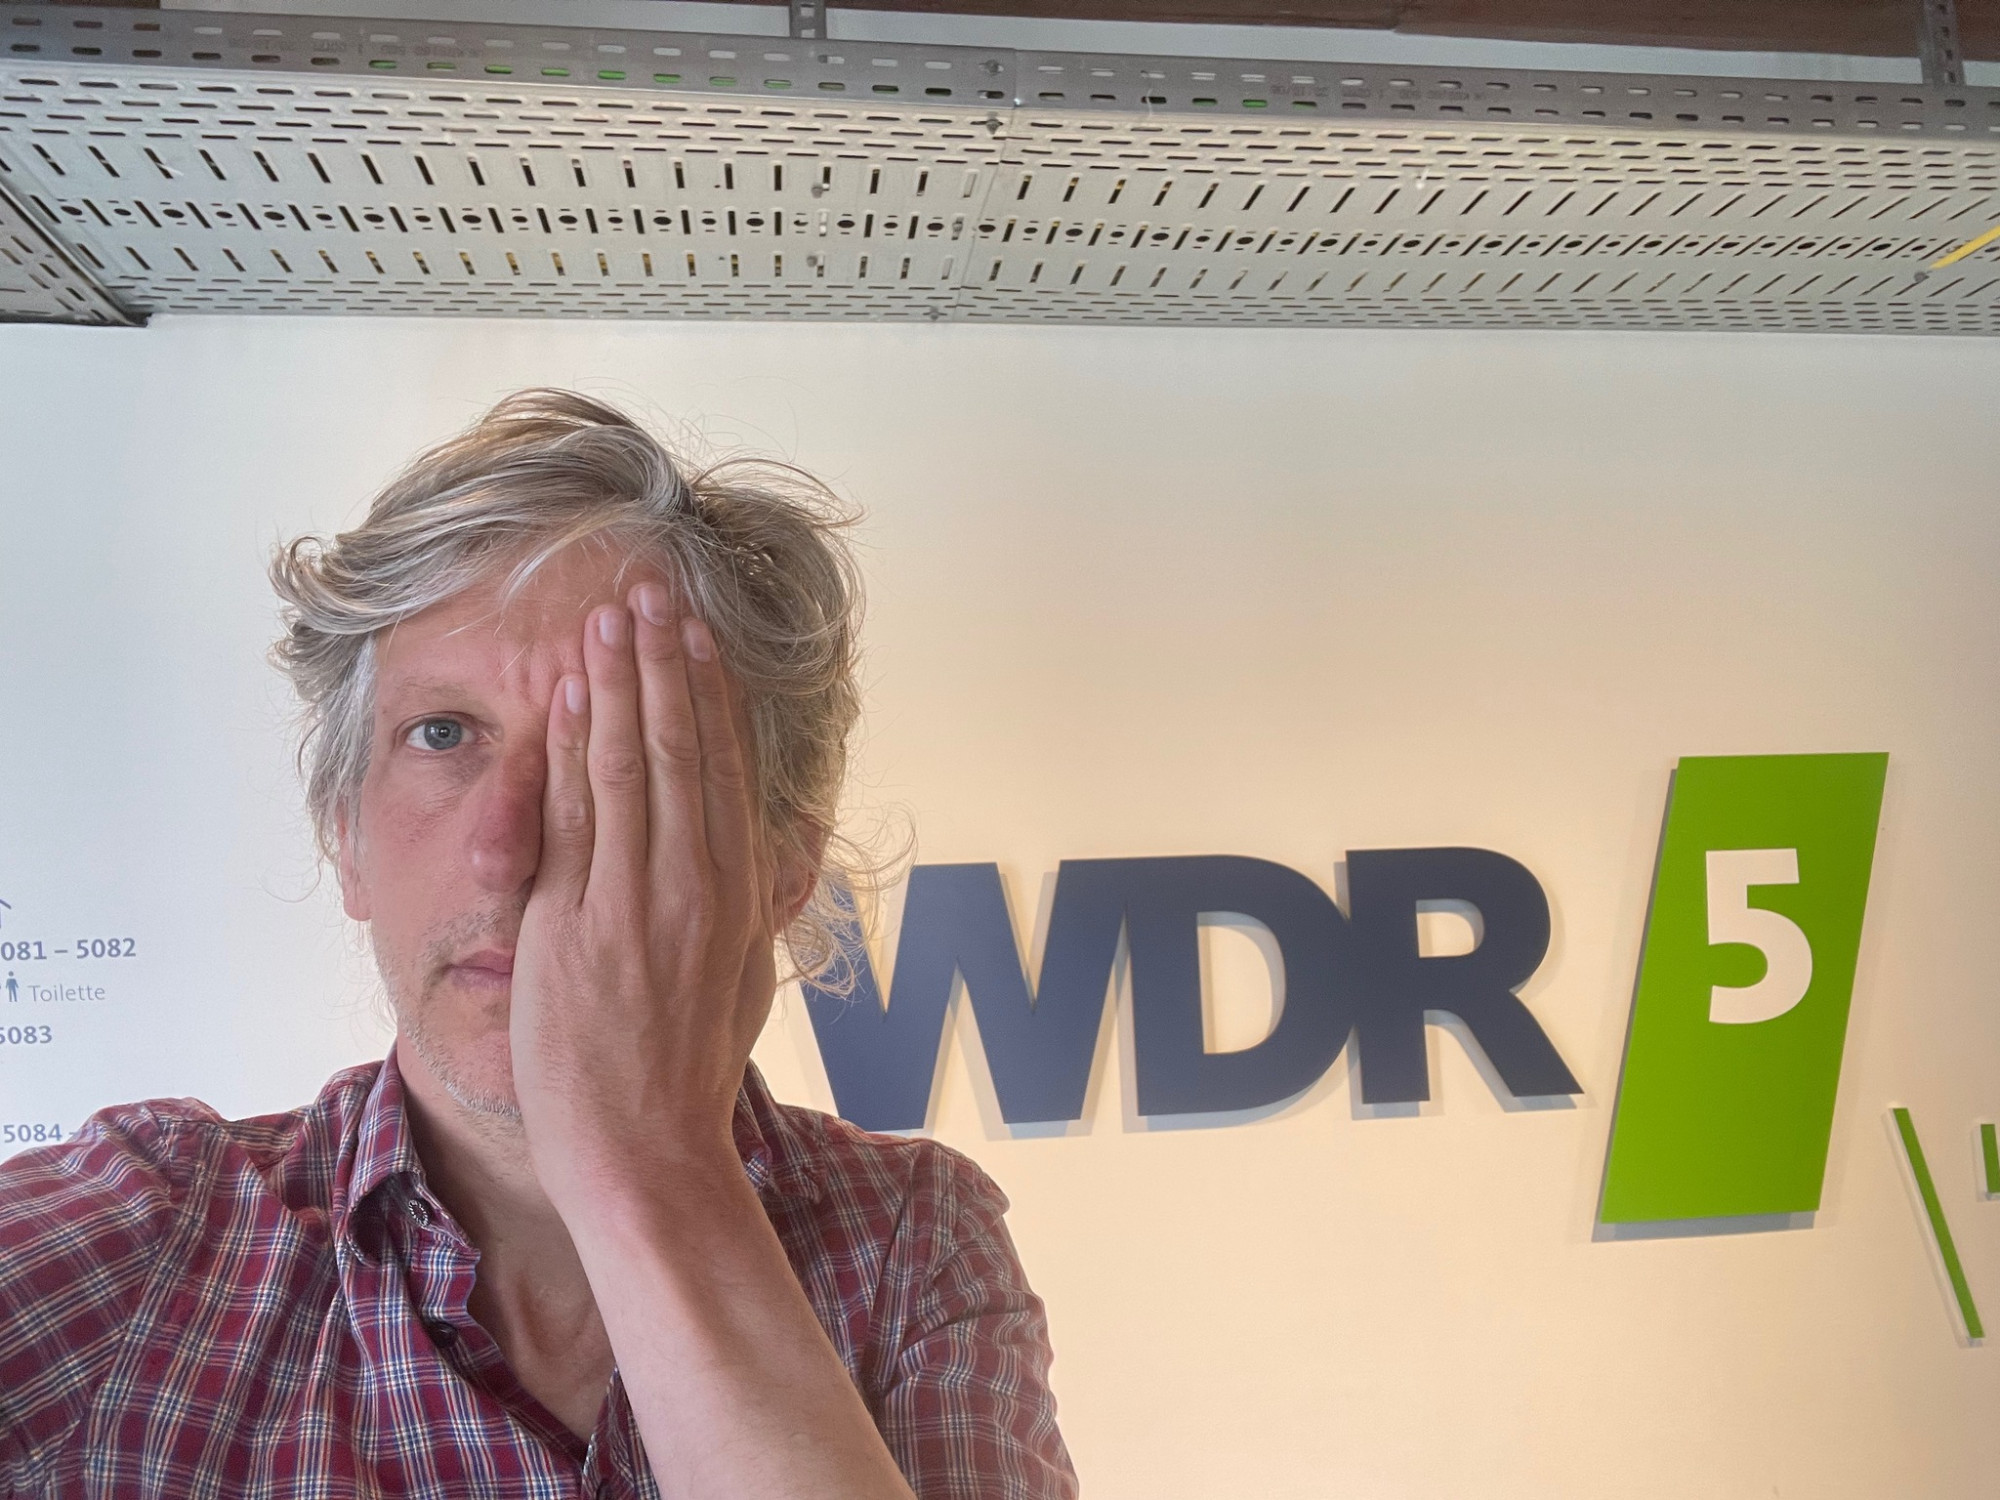 Bei WDR 5